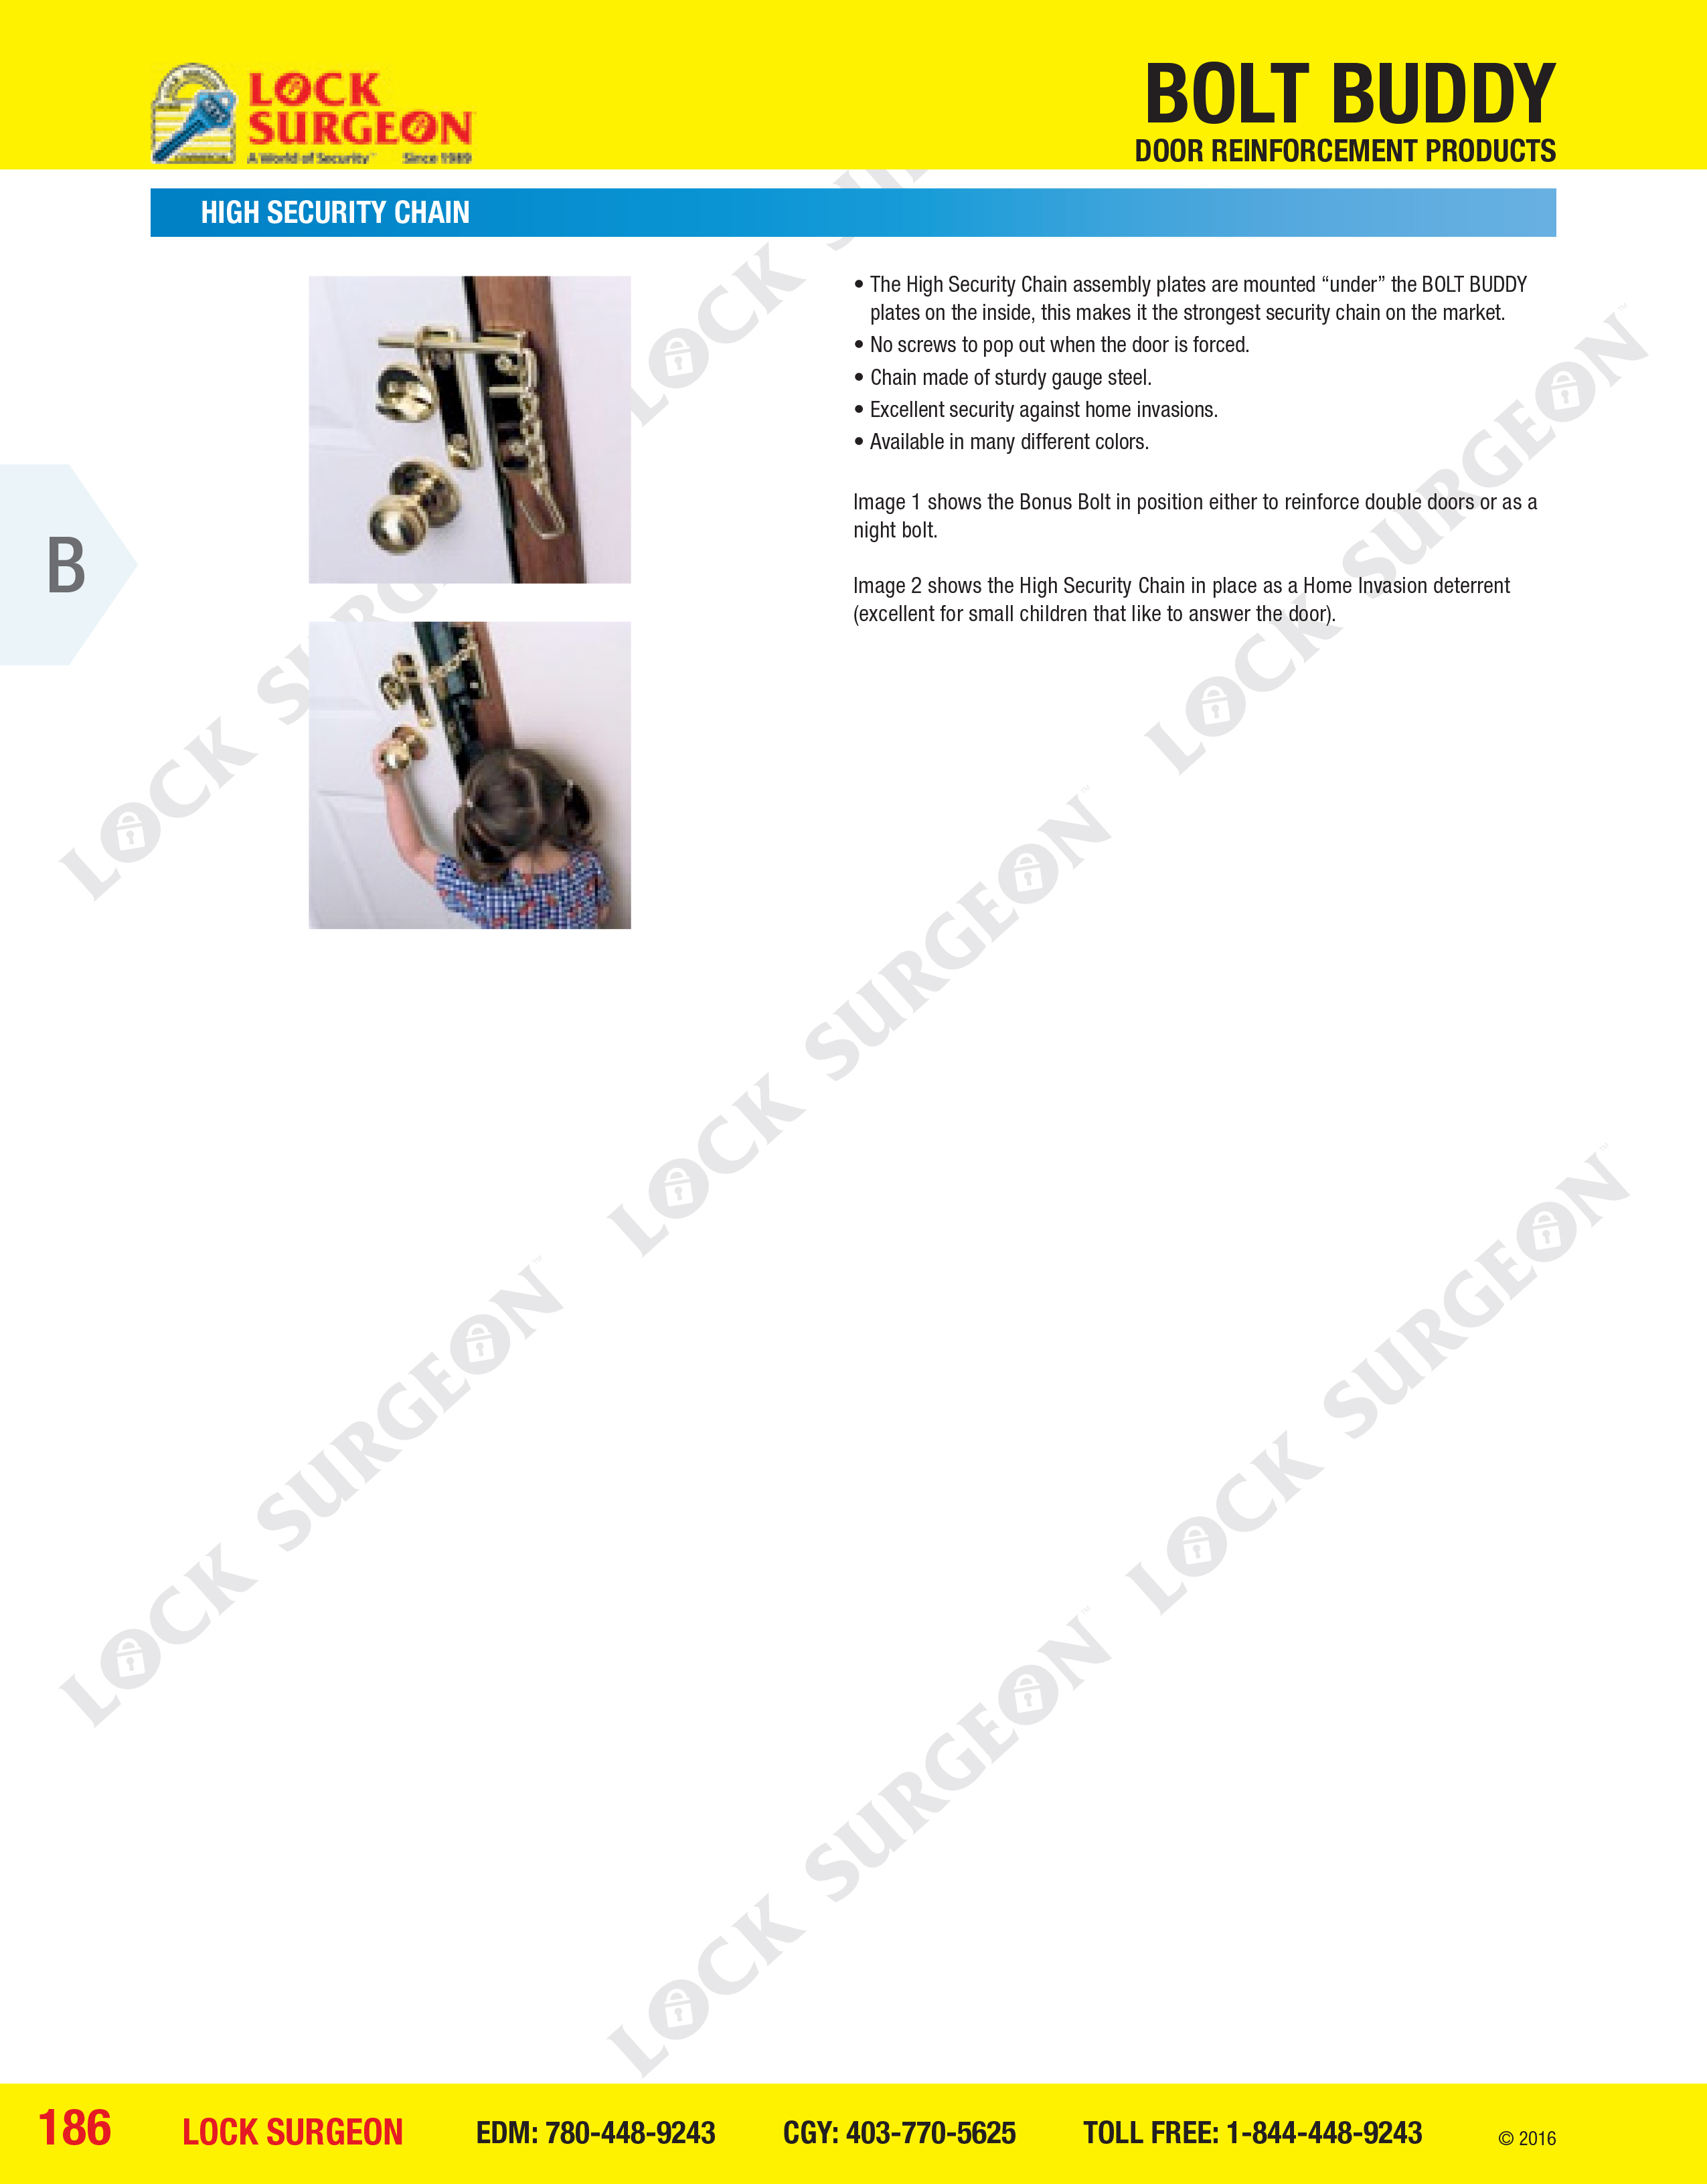 High security chain assembly